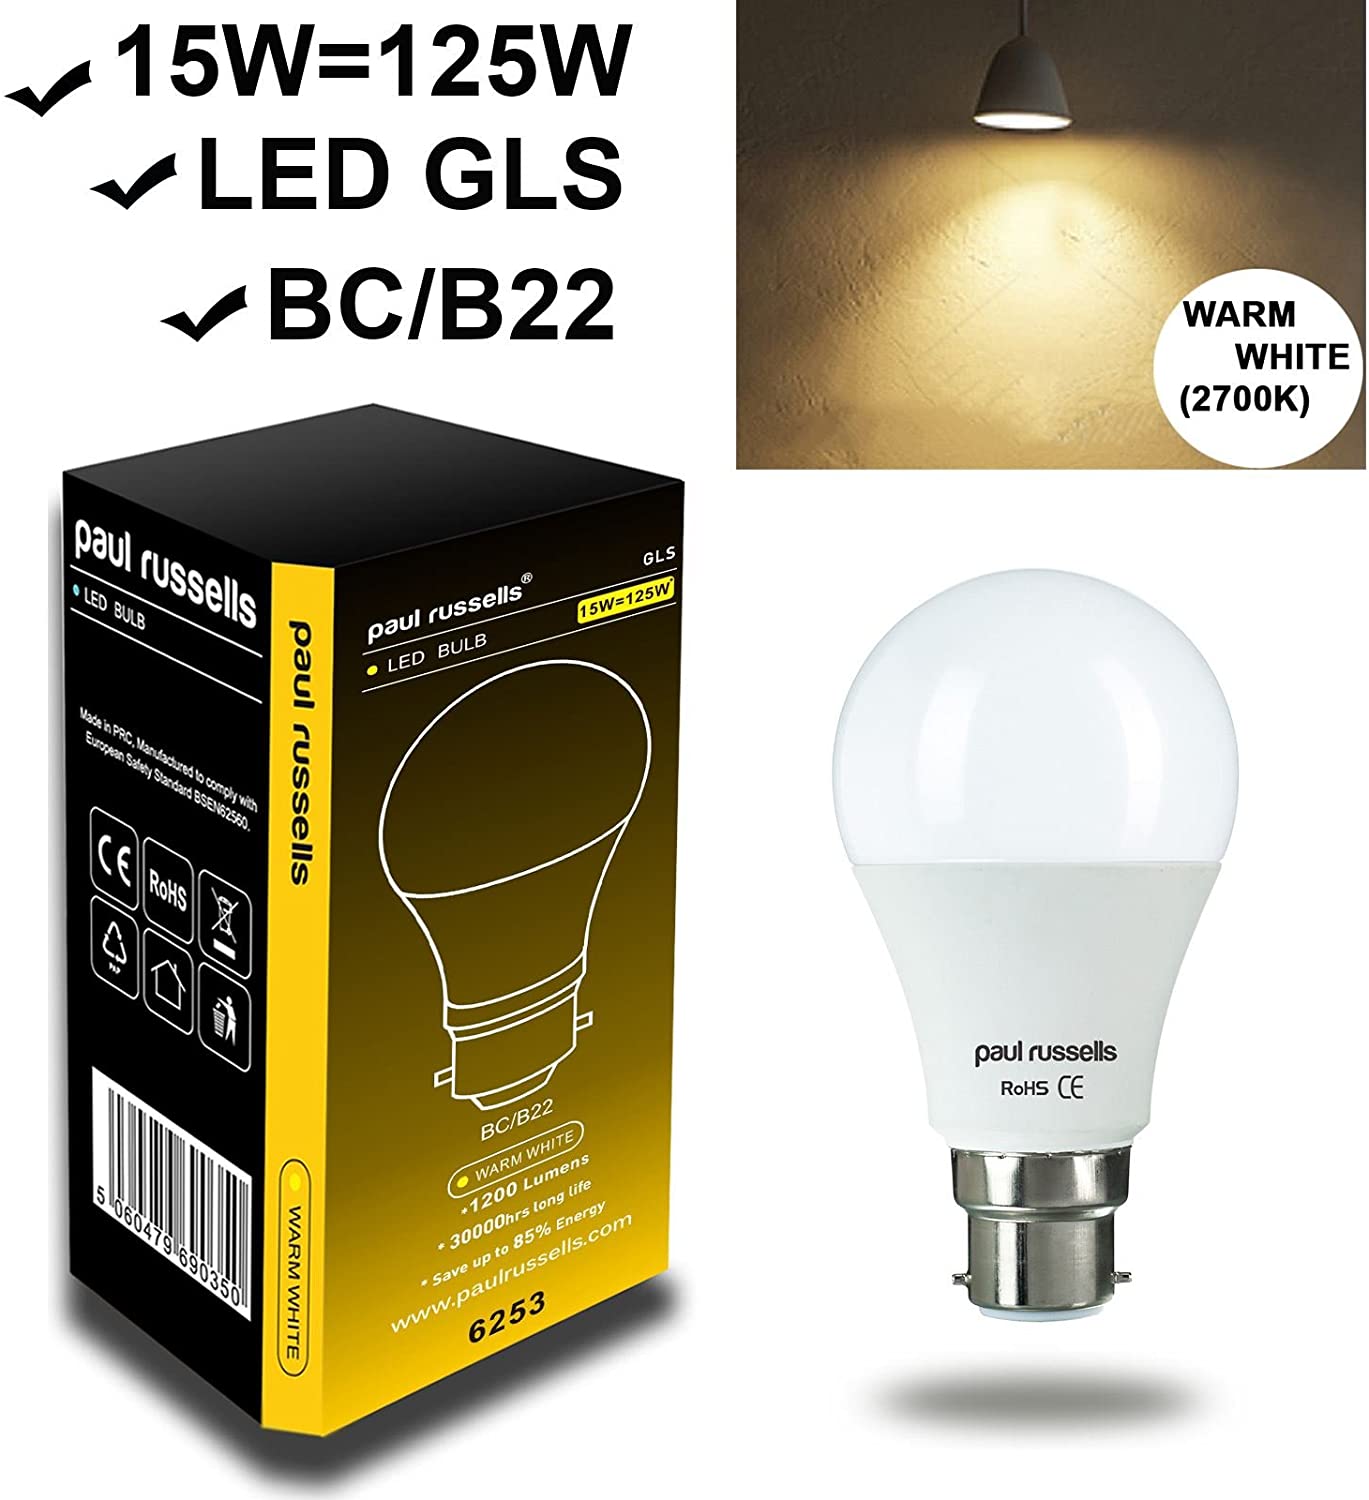 2 Pack 15W GLS LED Light Bulbs B22 BC Bayonet Paul Russells Bright 15W=125W A60 Globe 270 Beam Lamp 2700K Warm White 125W Incandescent Replacement